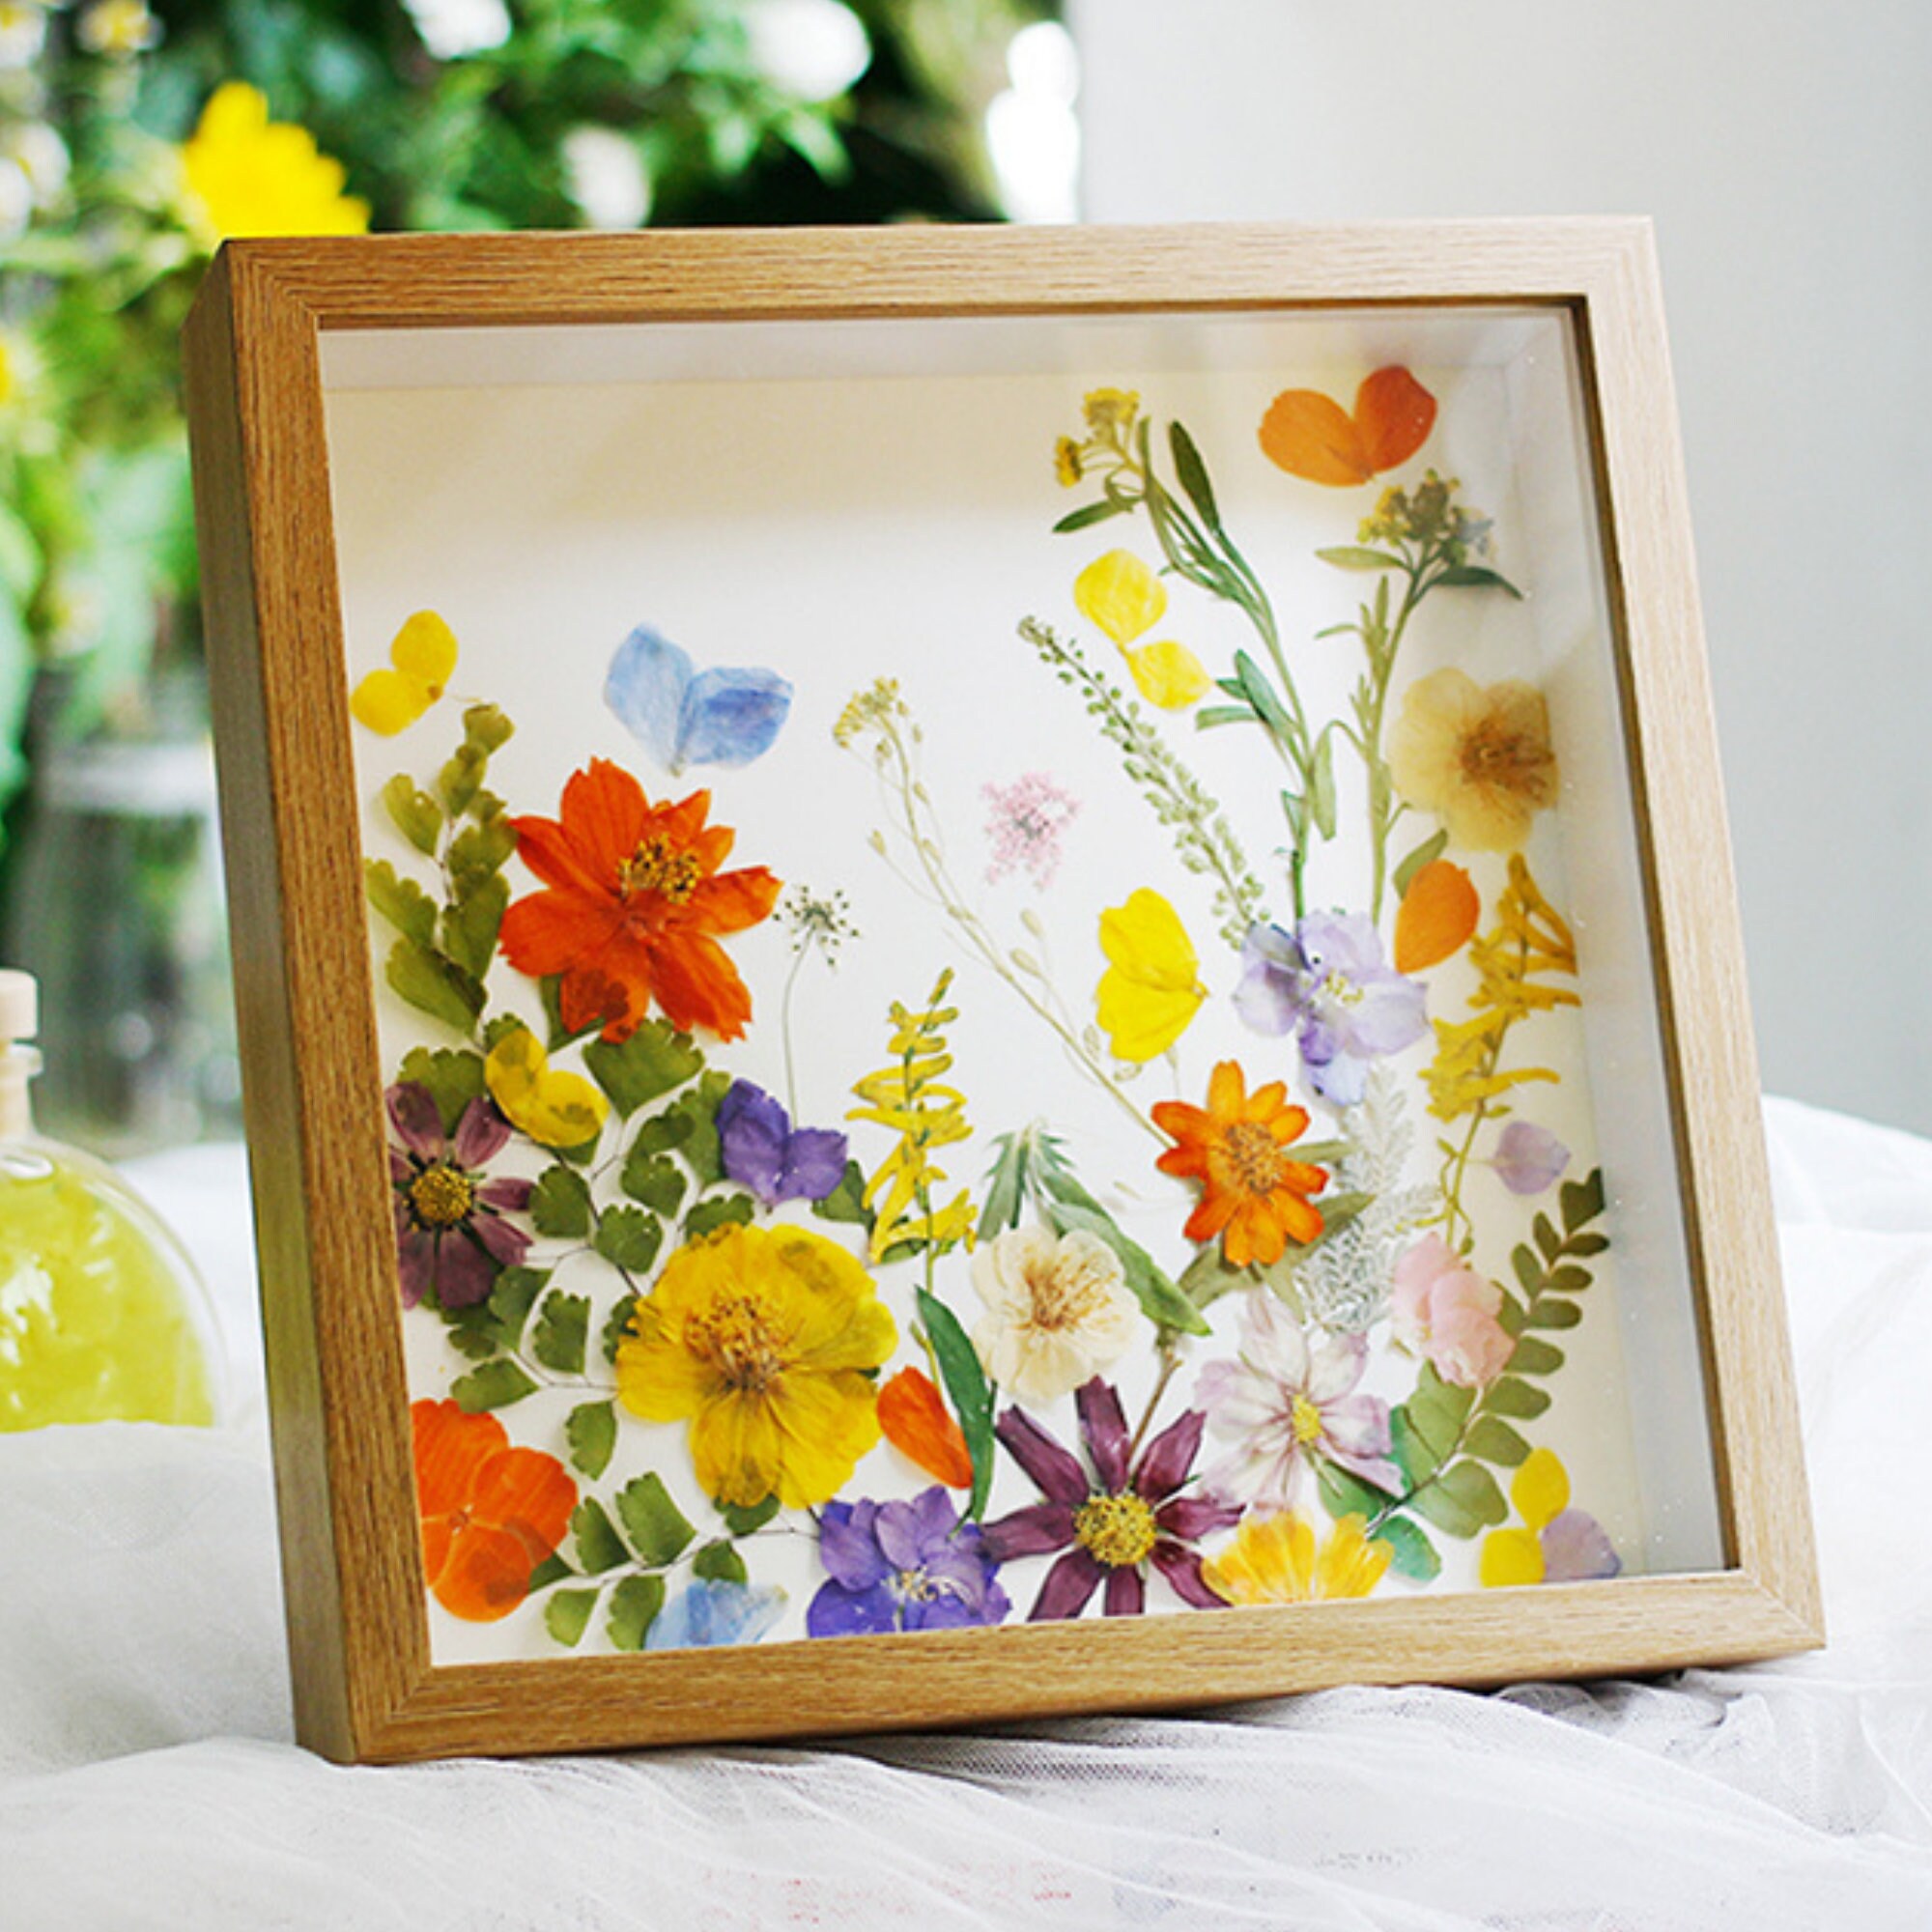 My new oshibana -> pressed flowers frame with real dried flowers